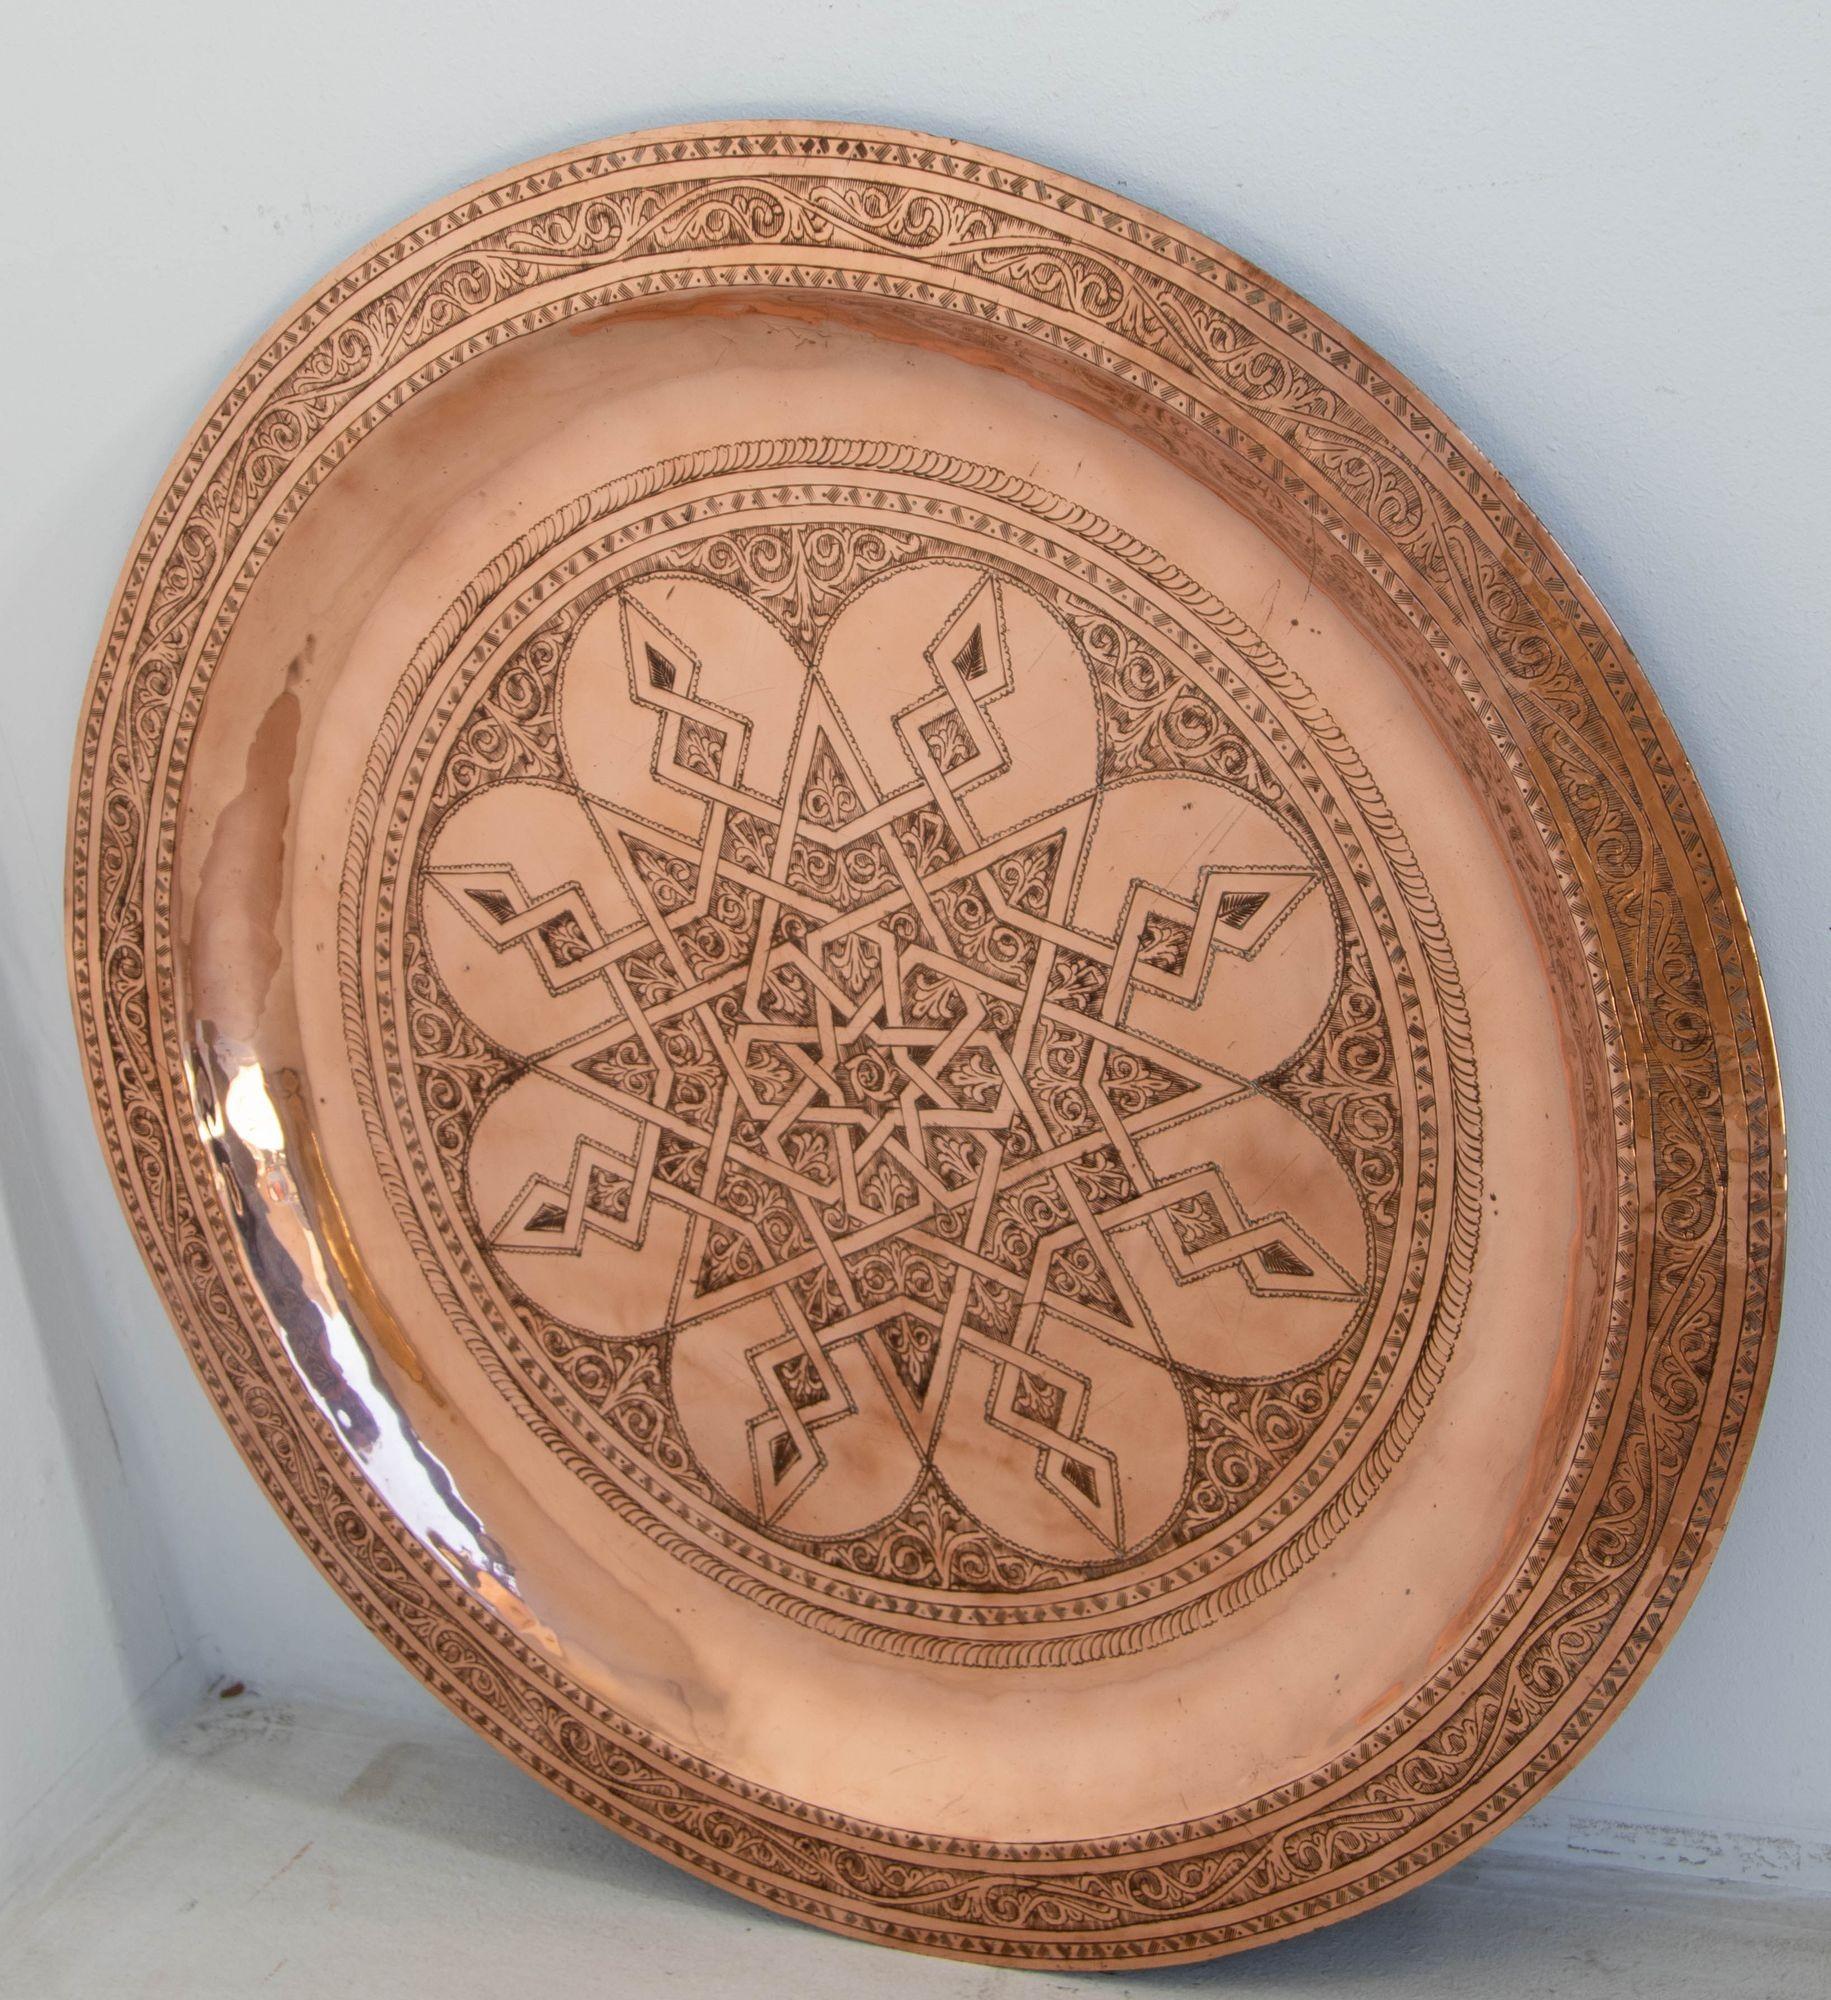 Antique Hand Tooled Oversized Moroccan Metal Copper Tray 31 in. D. Circa 1920's.
Antique hand tooled heavy huge collectible Moroccan metal copper tray platter charger, 38 inches diameter. Circa 1920's.
Stunning antique huge handcrafted Moroccan